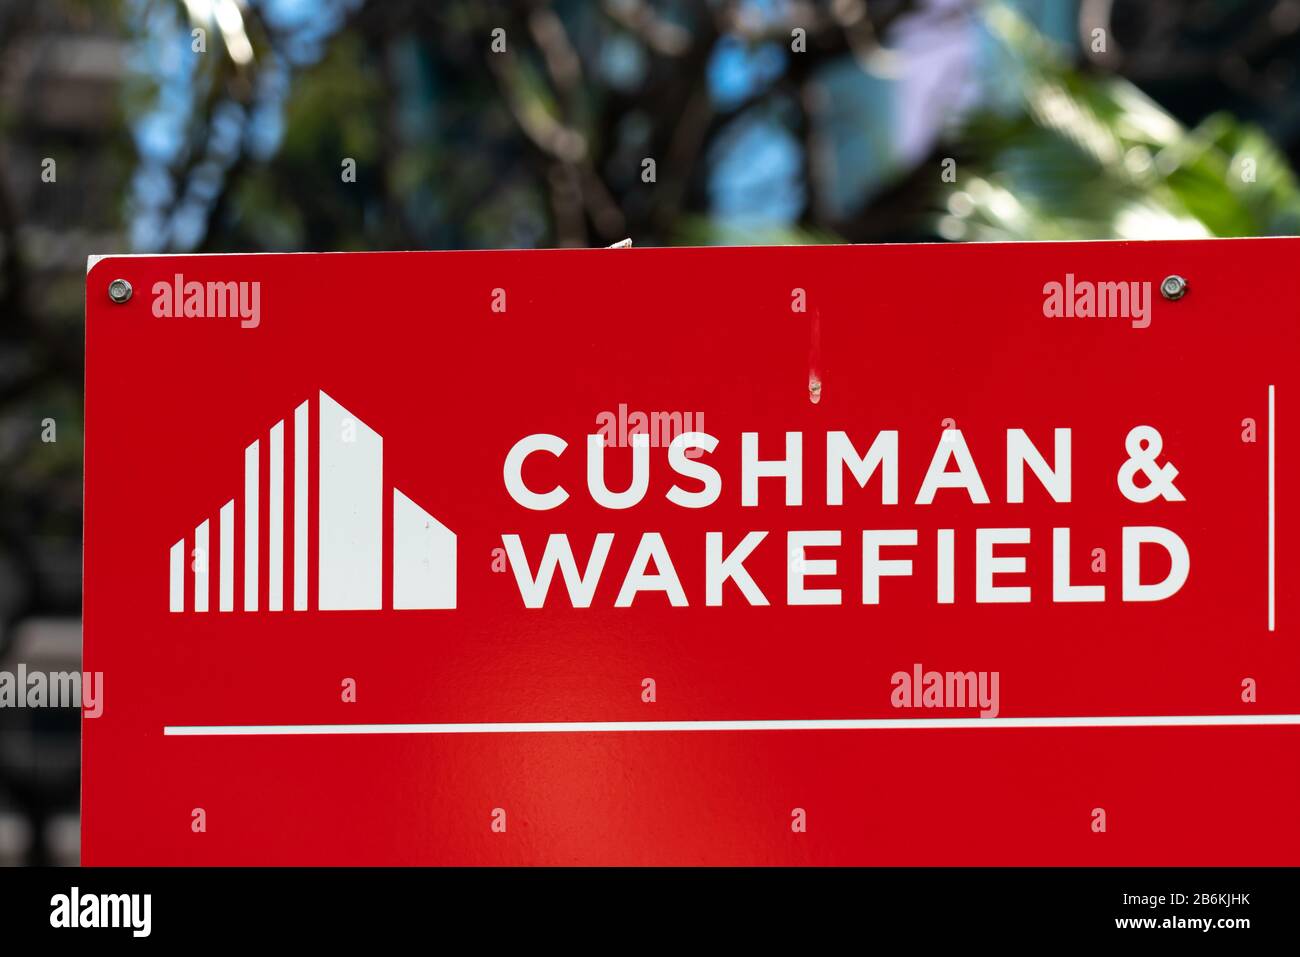 Cushman wakefield stock and images - Alamy